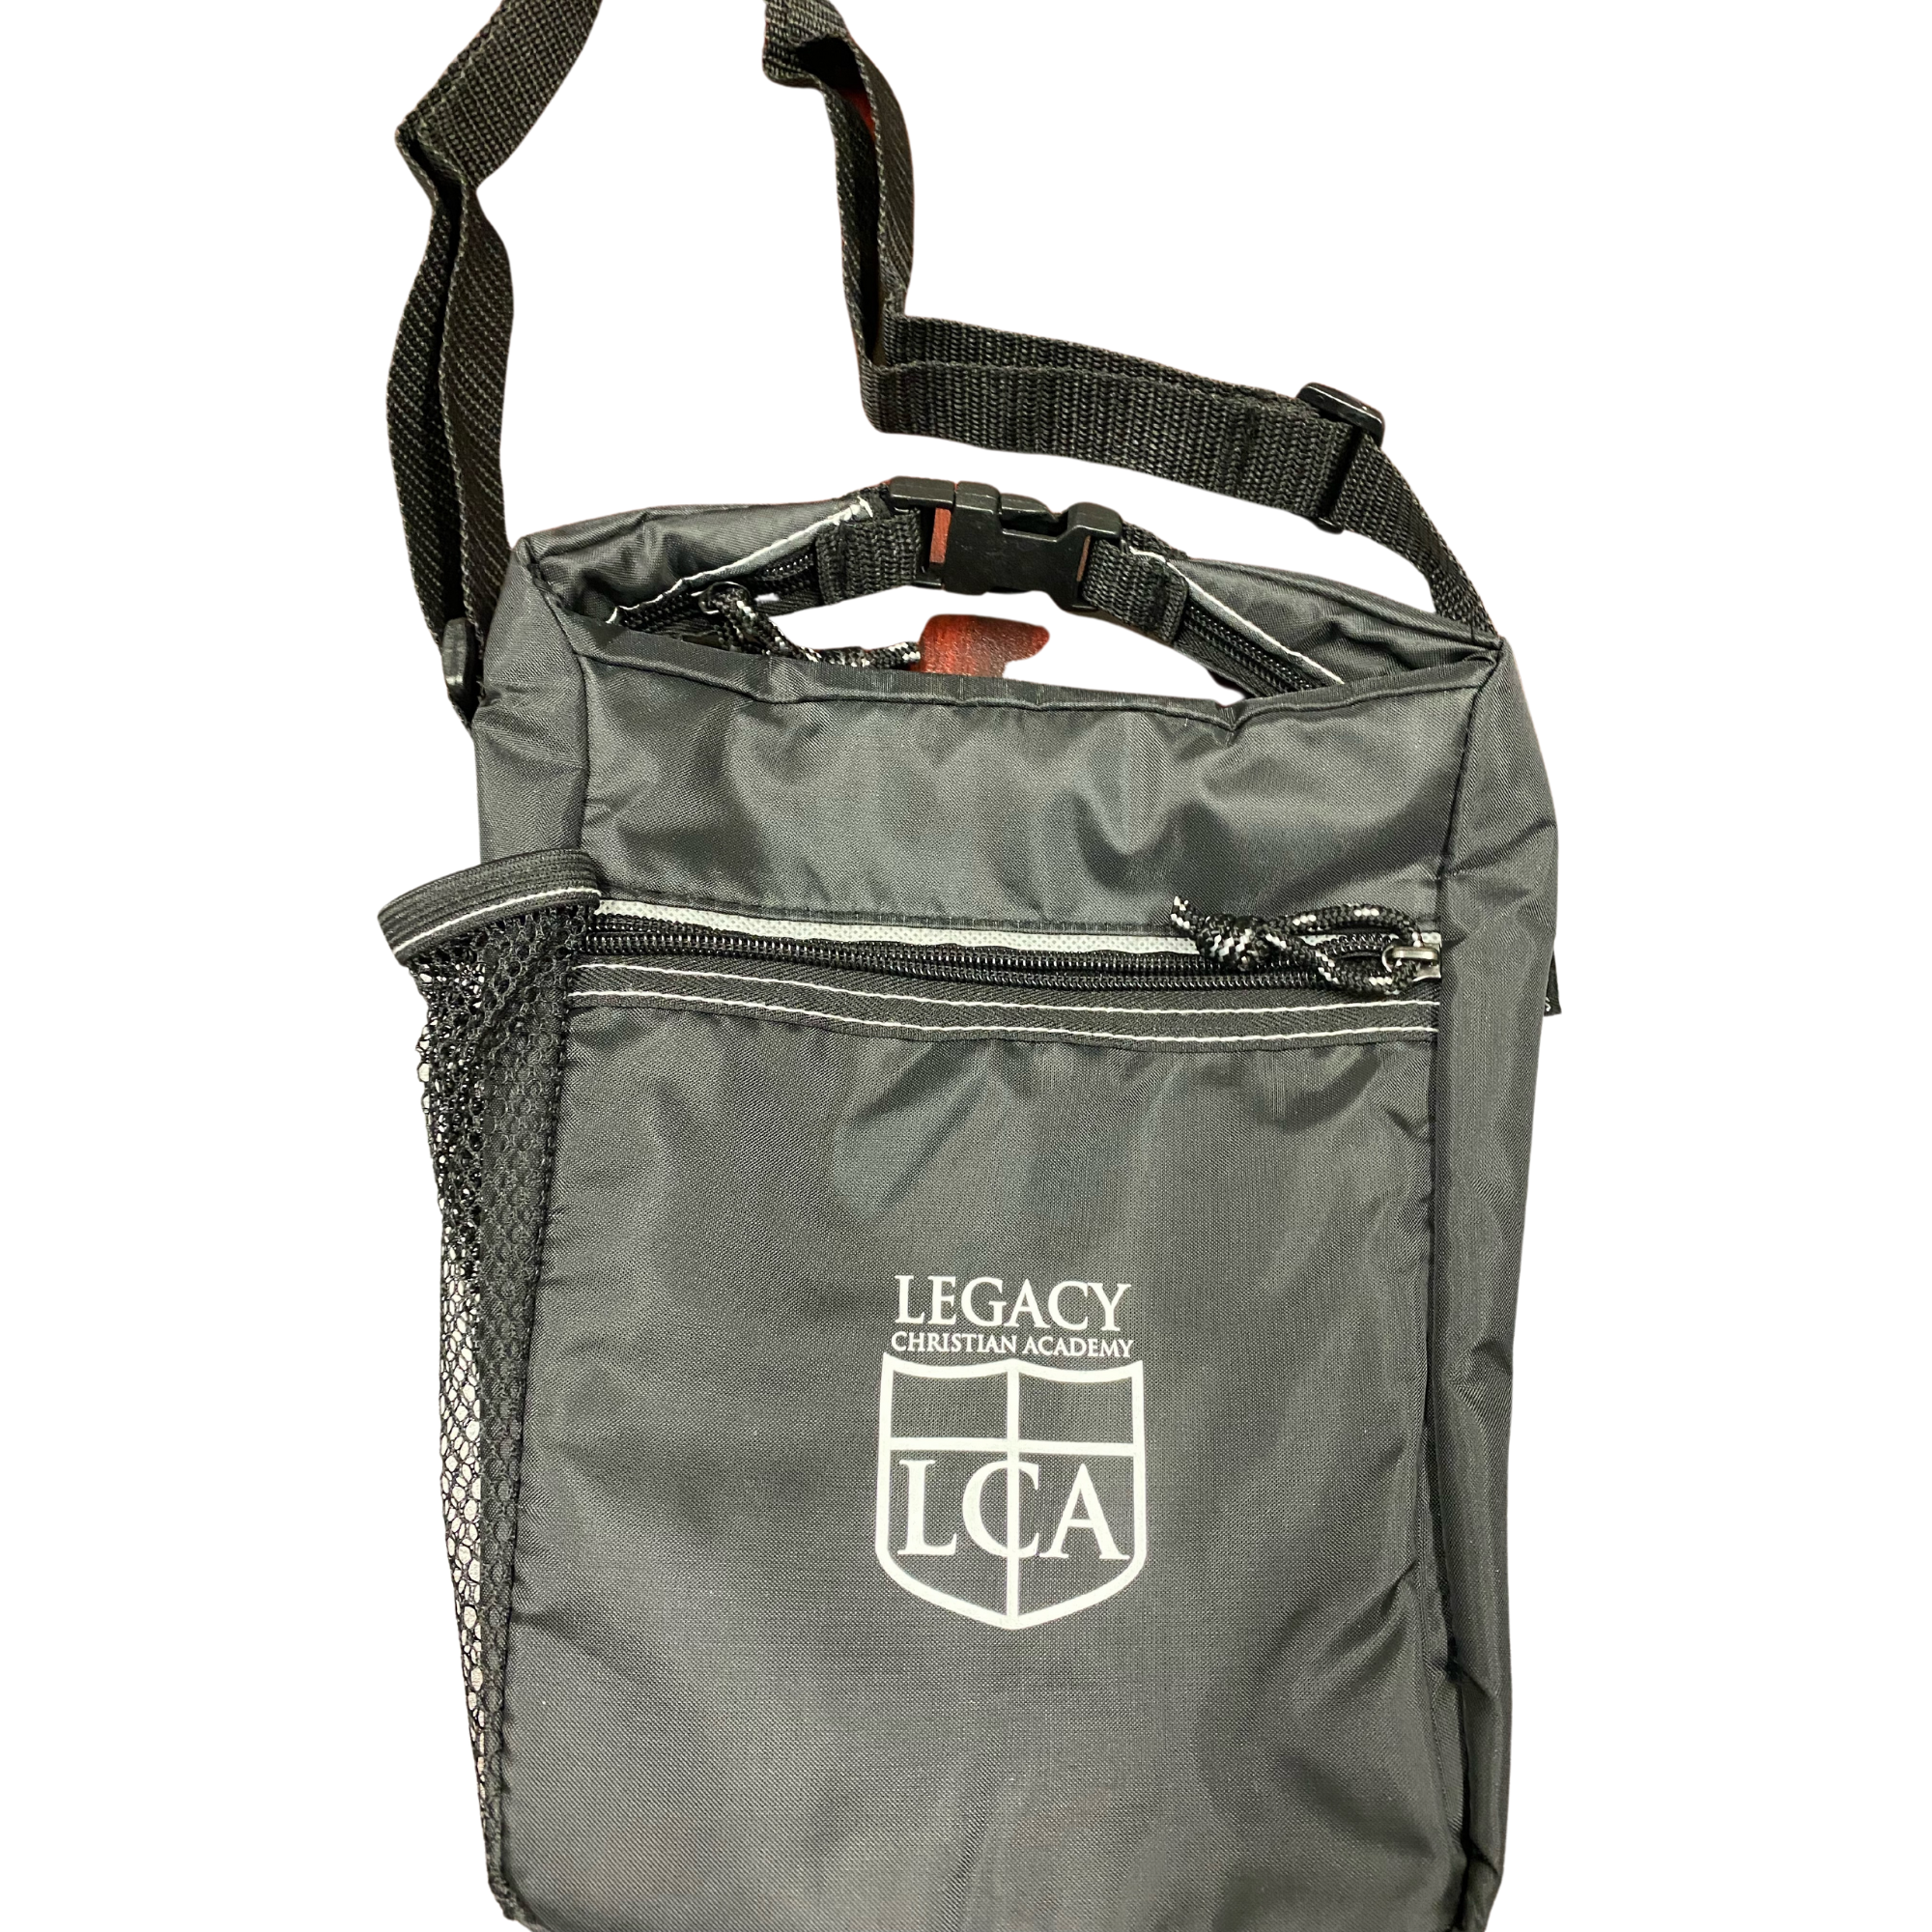 LCA LUNCH TOTE